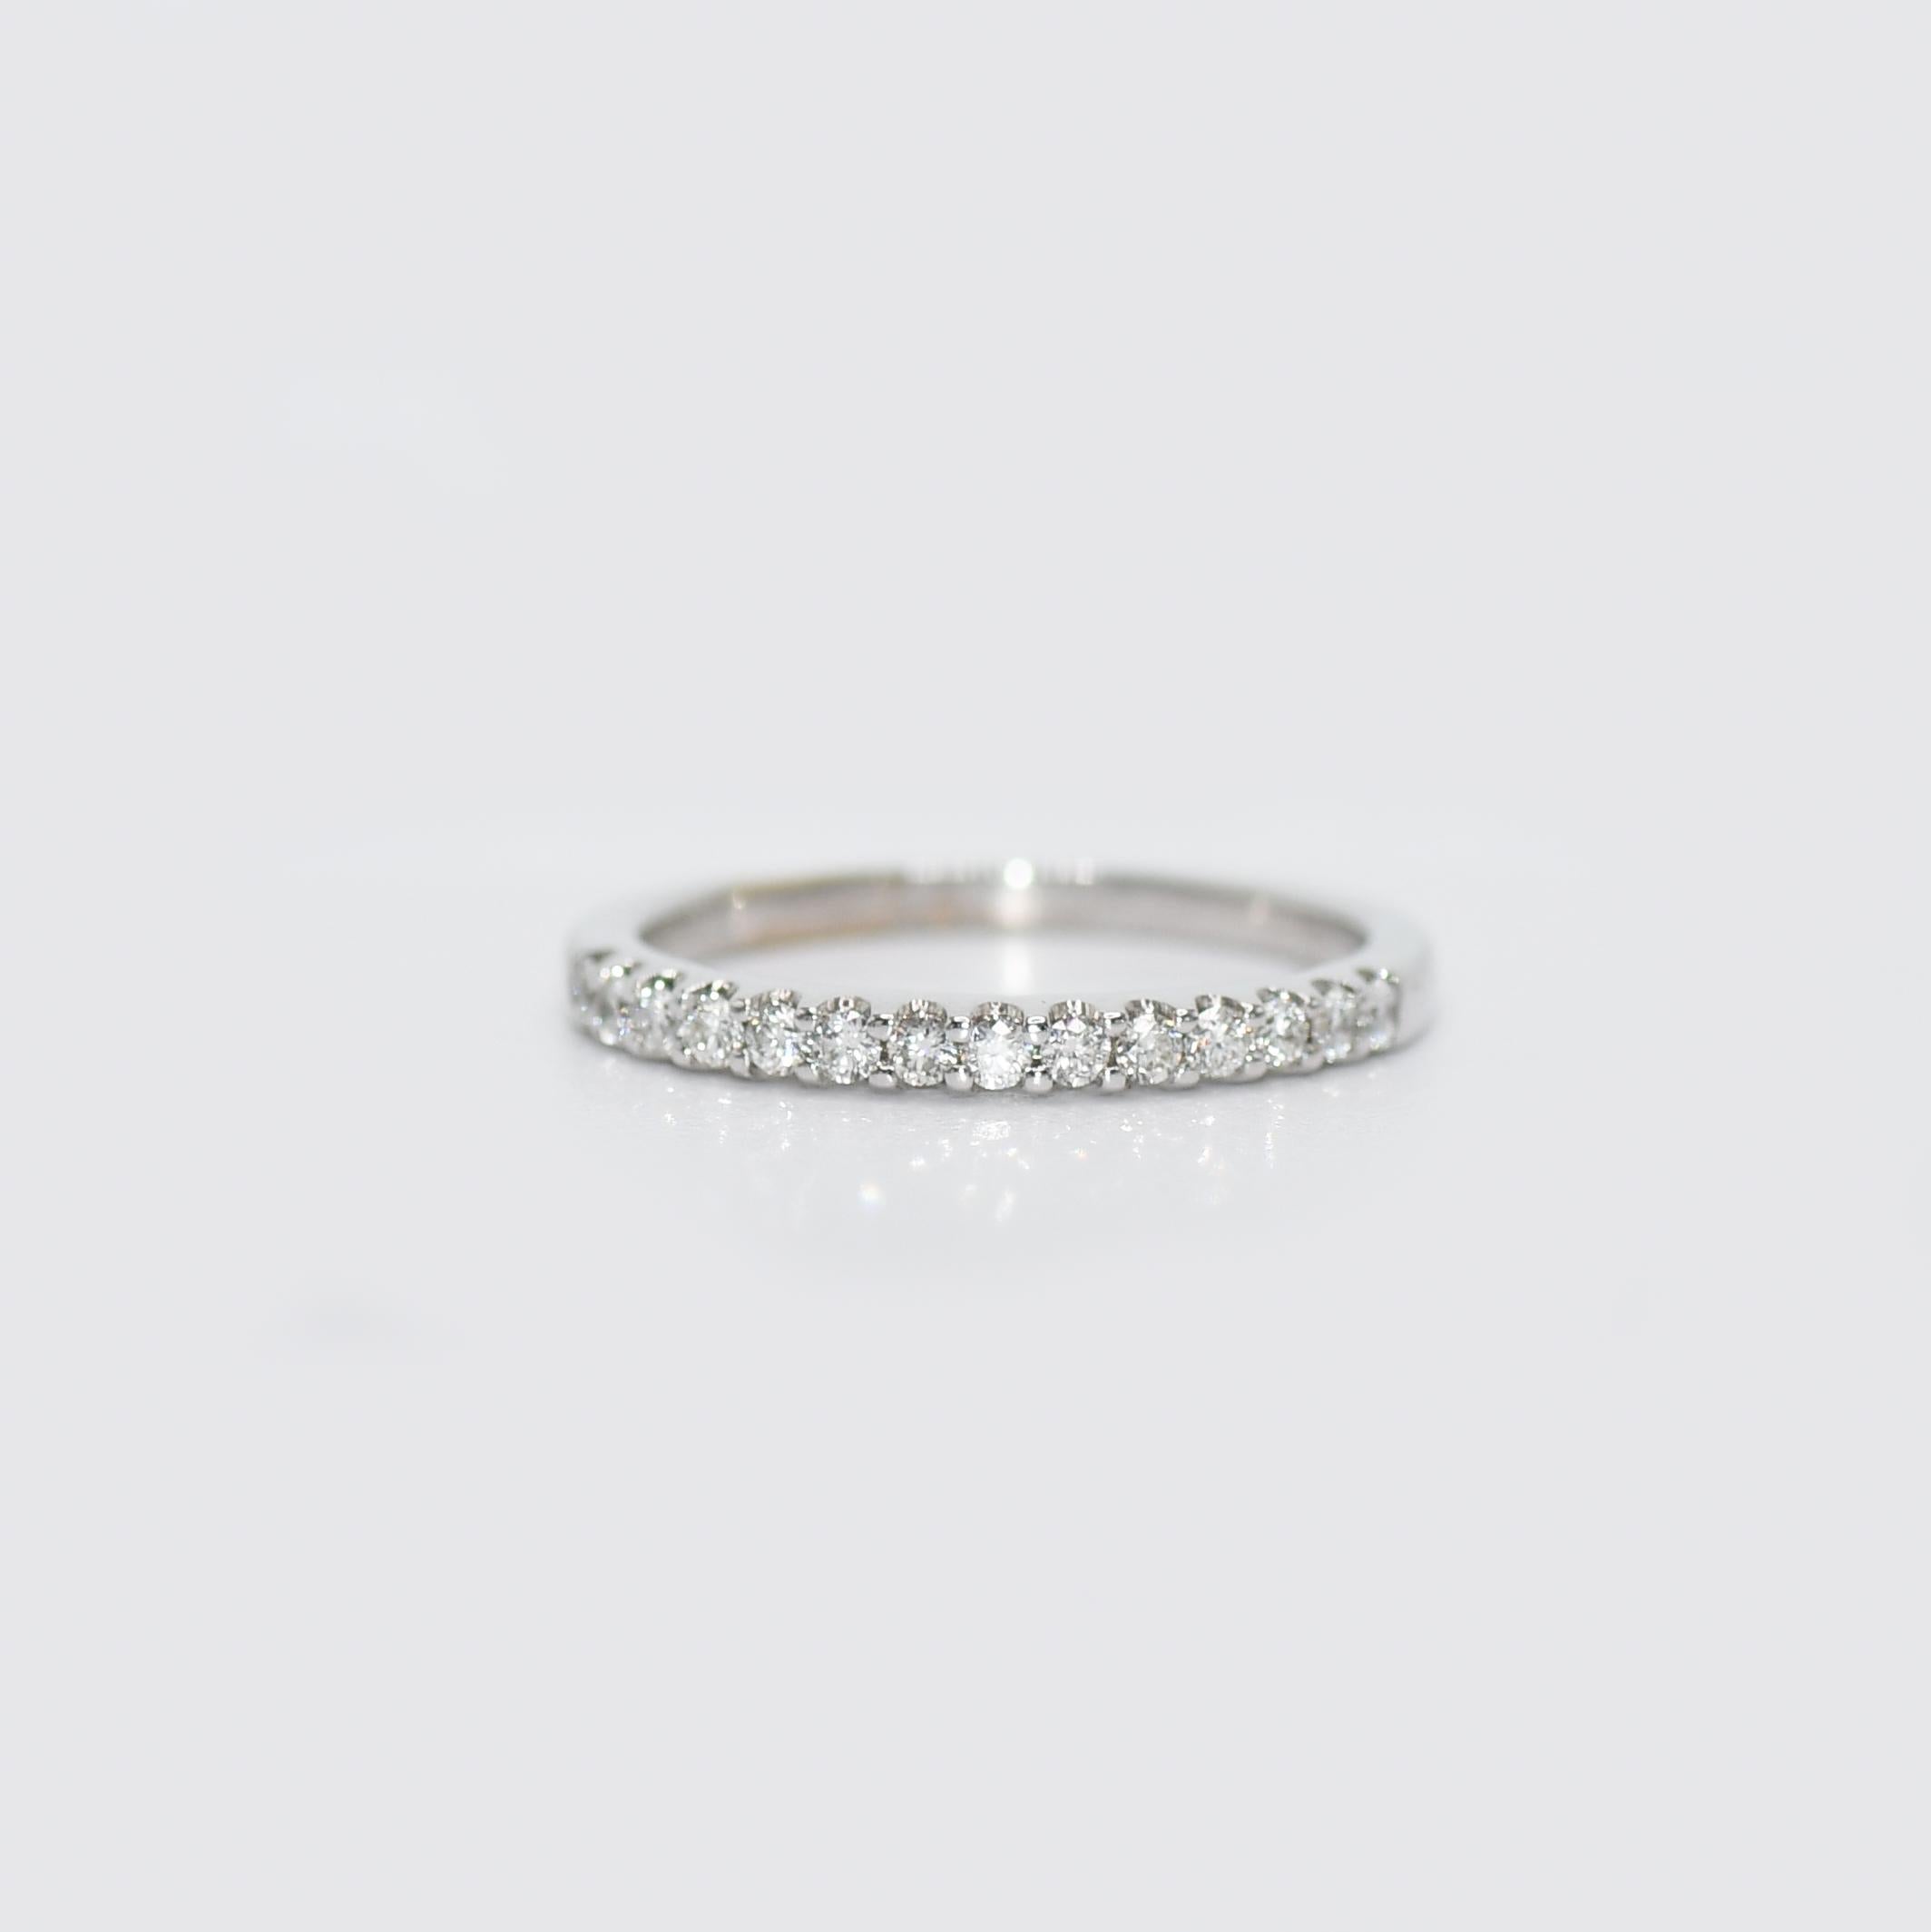 18k White Gold Diamond Band.
There is .14tdw, Round Brilliant Cuts. 
Clarity VS, Color F-G.
Stamped 750, weighs 1.9gr
Size 4 3/4, recently Rhodium Plated and Polished like new.